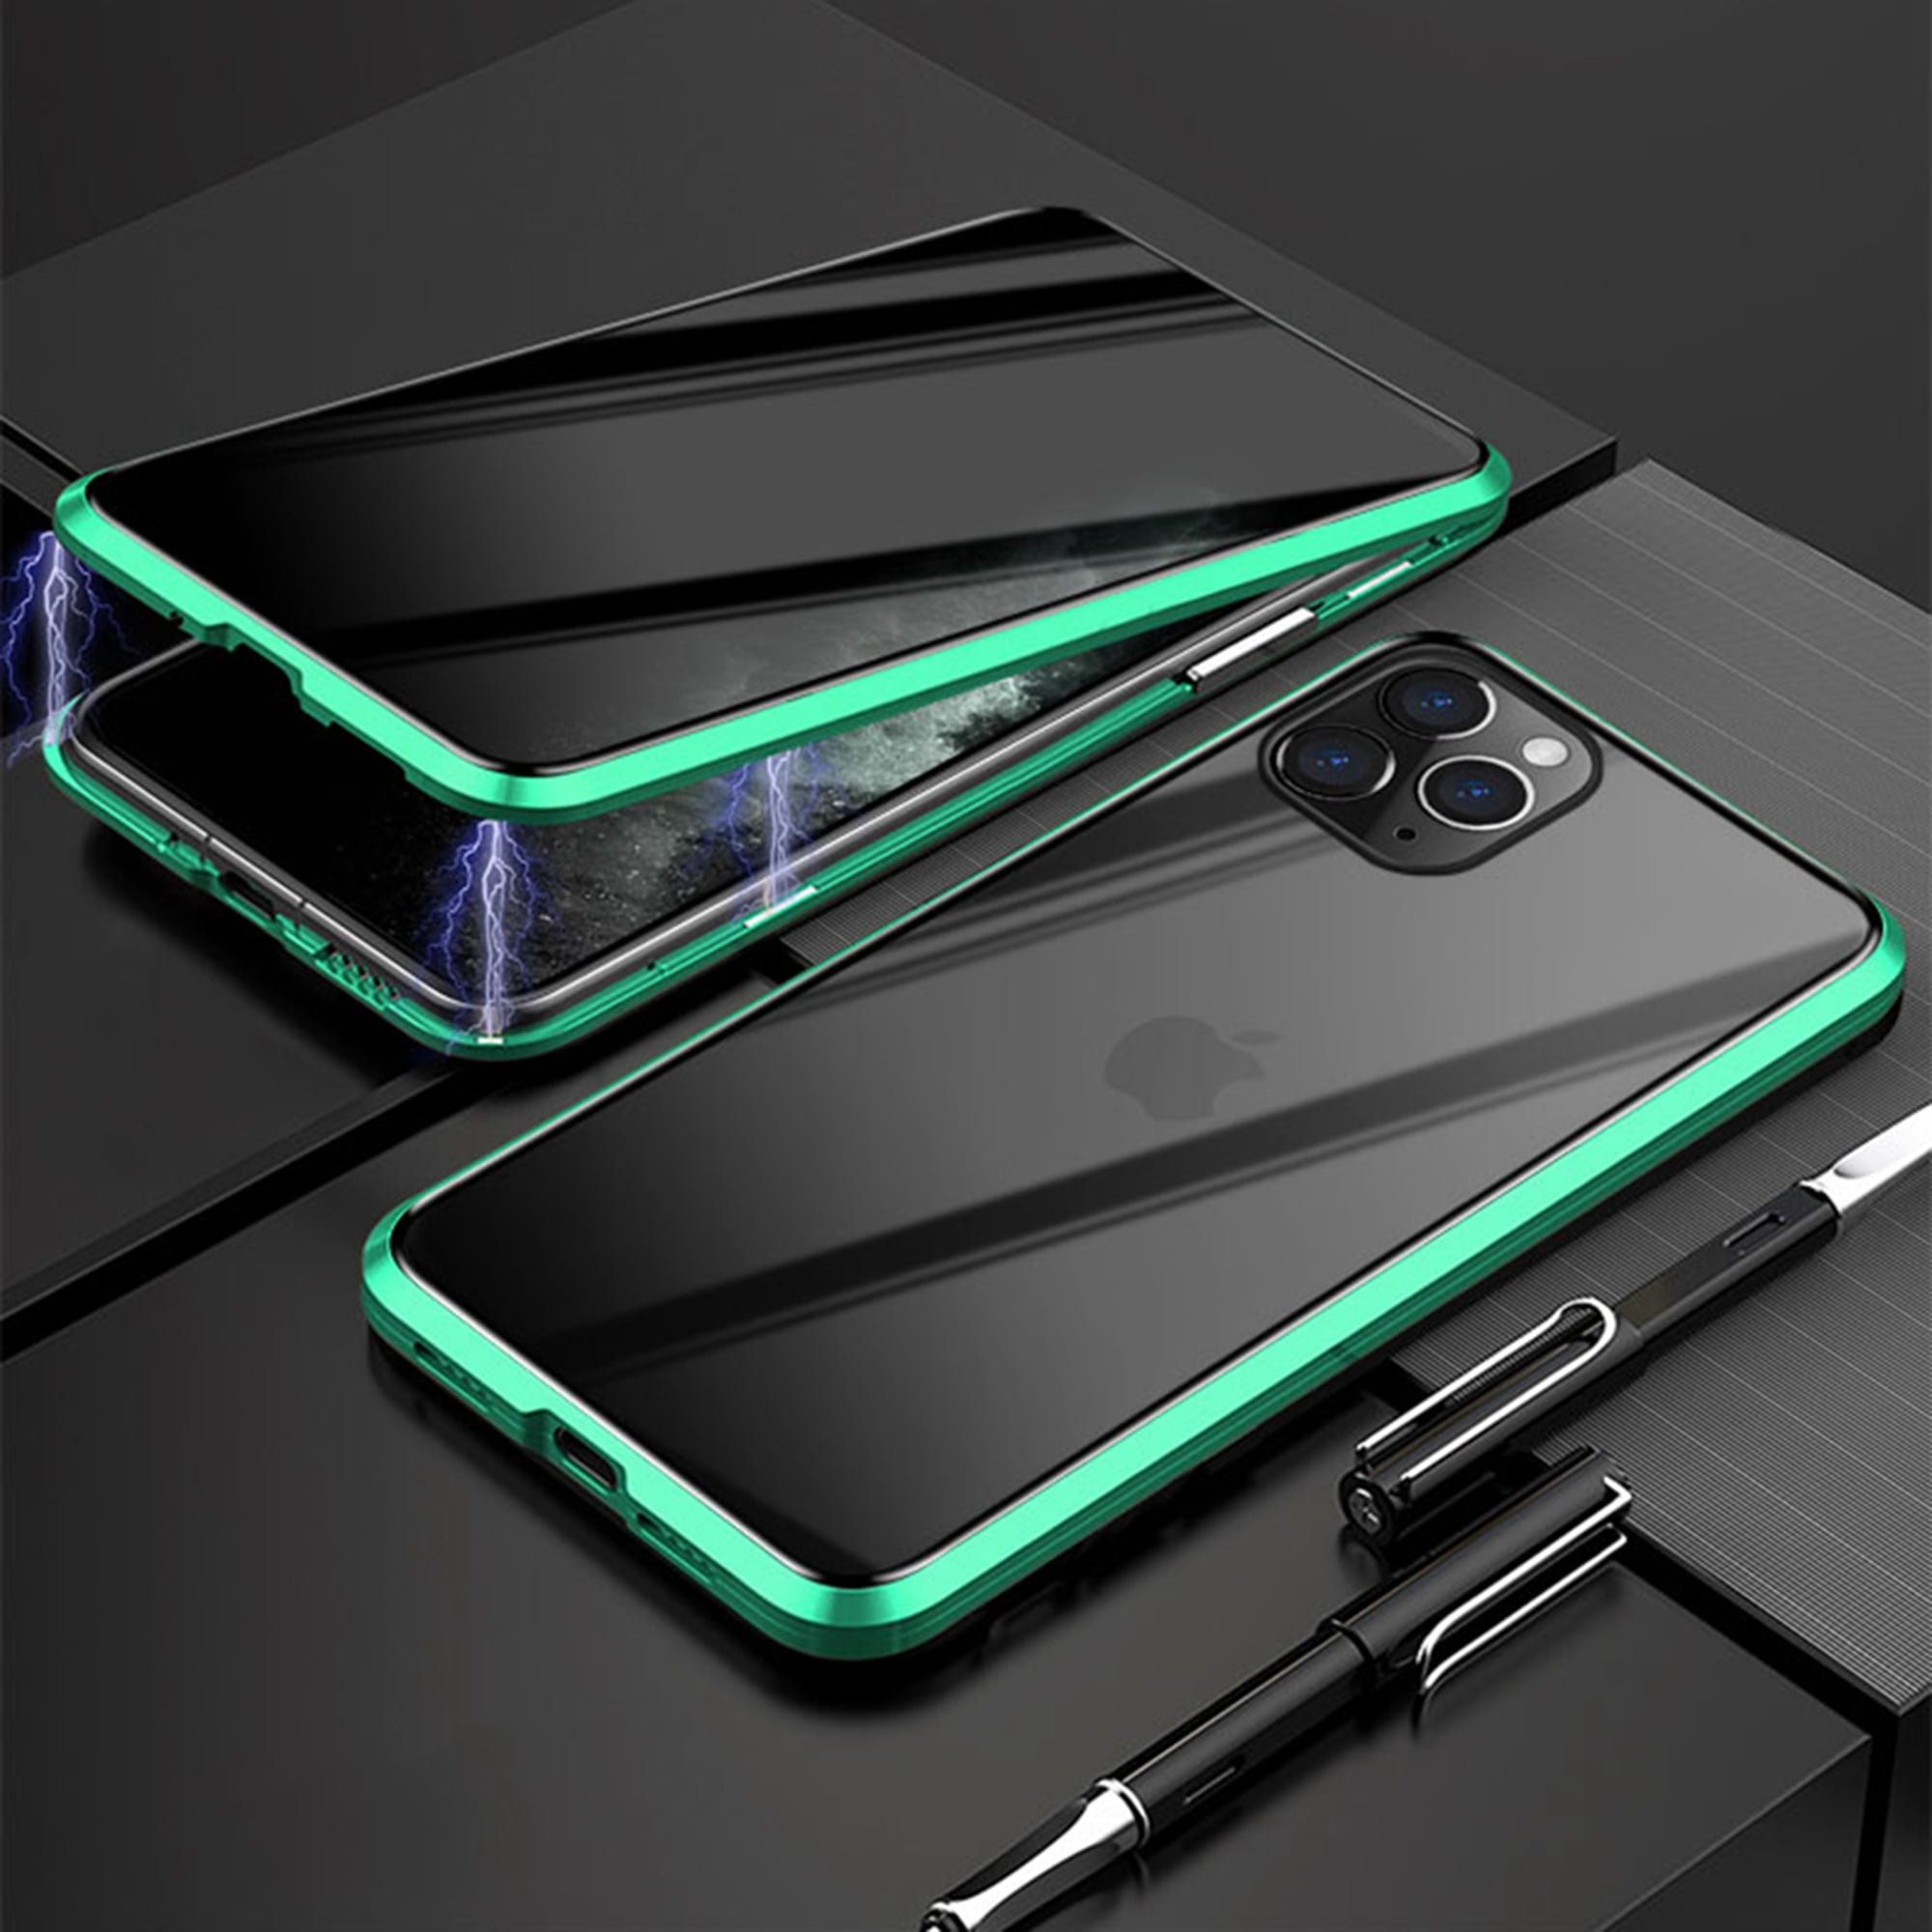 Clear Tempered Glass Back Full Body Built-in Privacy Screen Protector Slim Fit Ultra-Thin Case Lightweight, iPhone X/Xs Case, Black Magnetic Adsorption Metal Frame for iPhone X/Xs